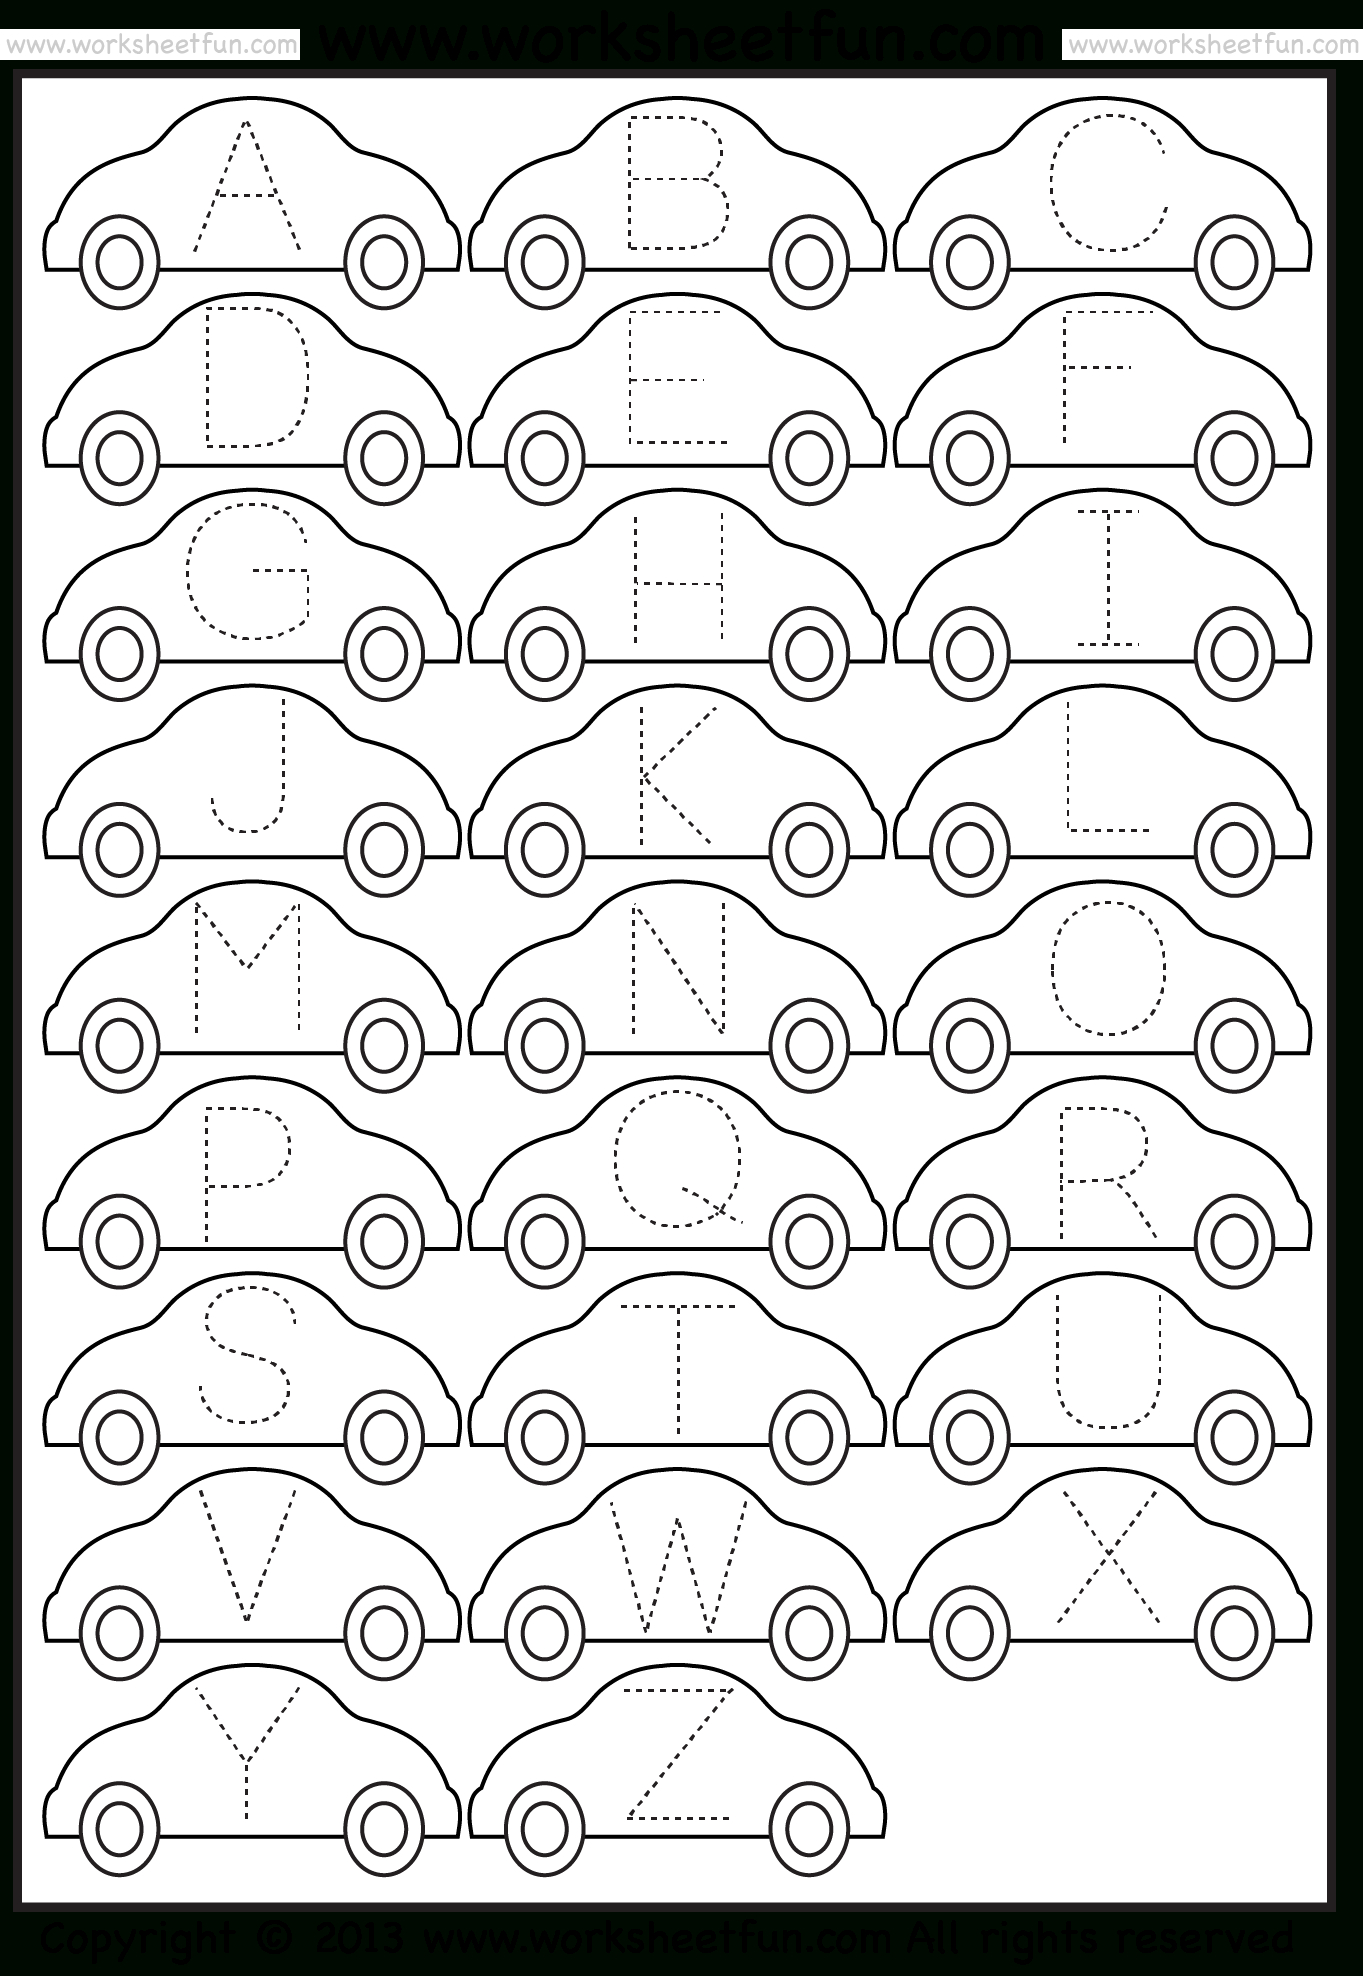 Tracing – Letter Tracing / Free Printable Worksheets – Worksheetfun - Free Printable Alphabet Pages